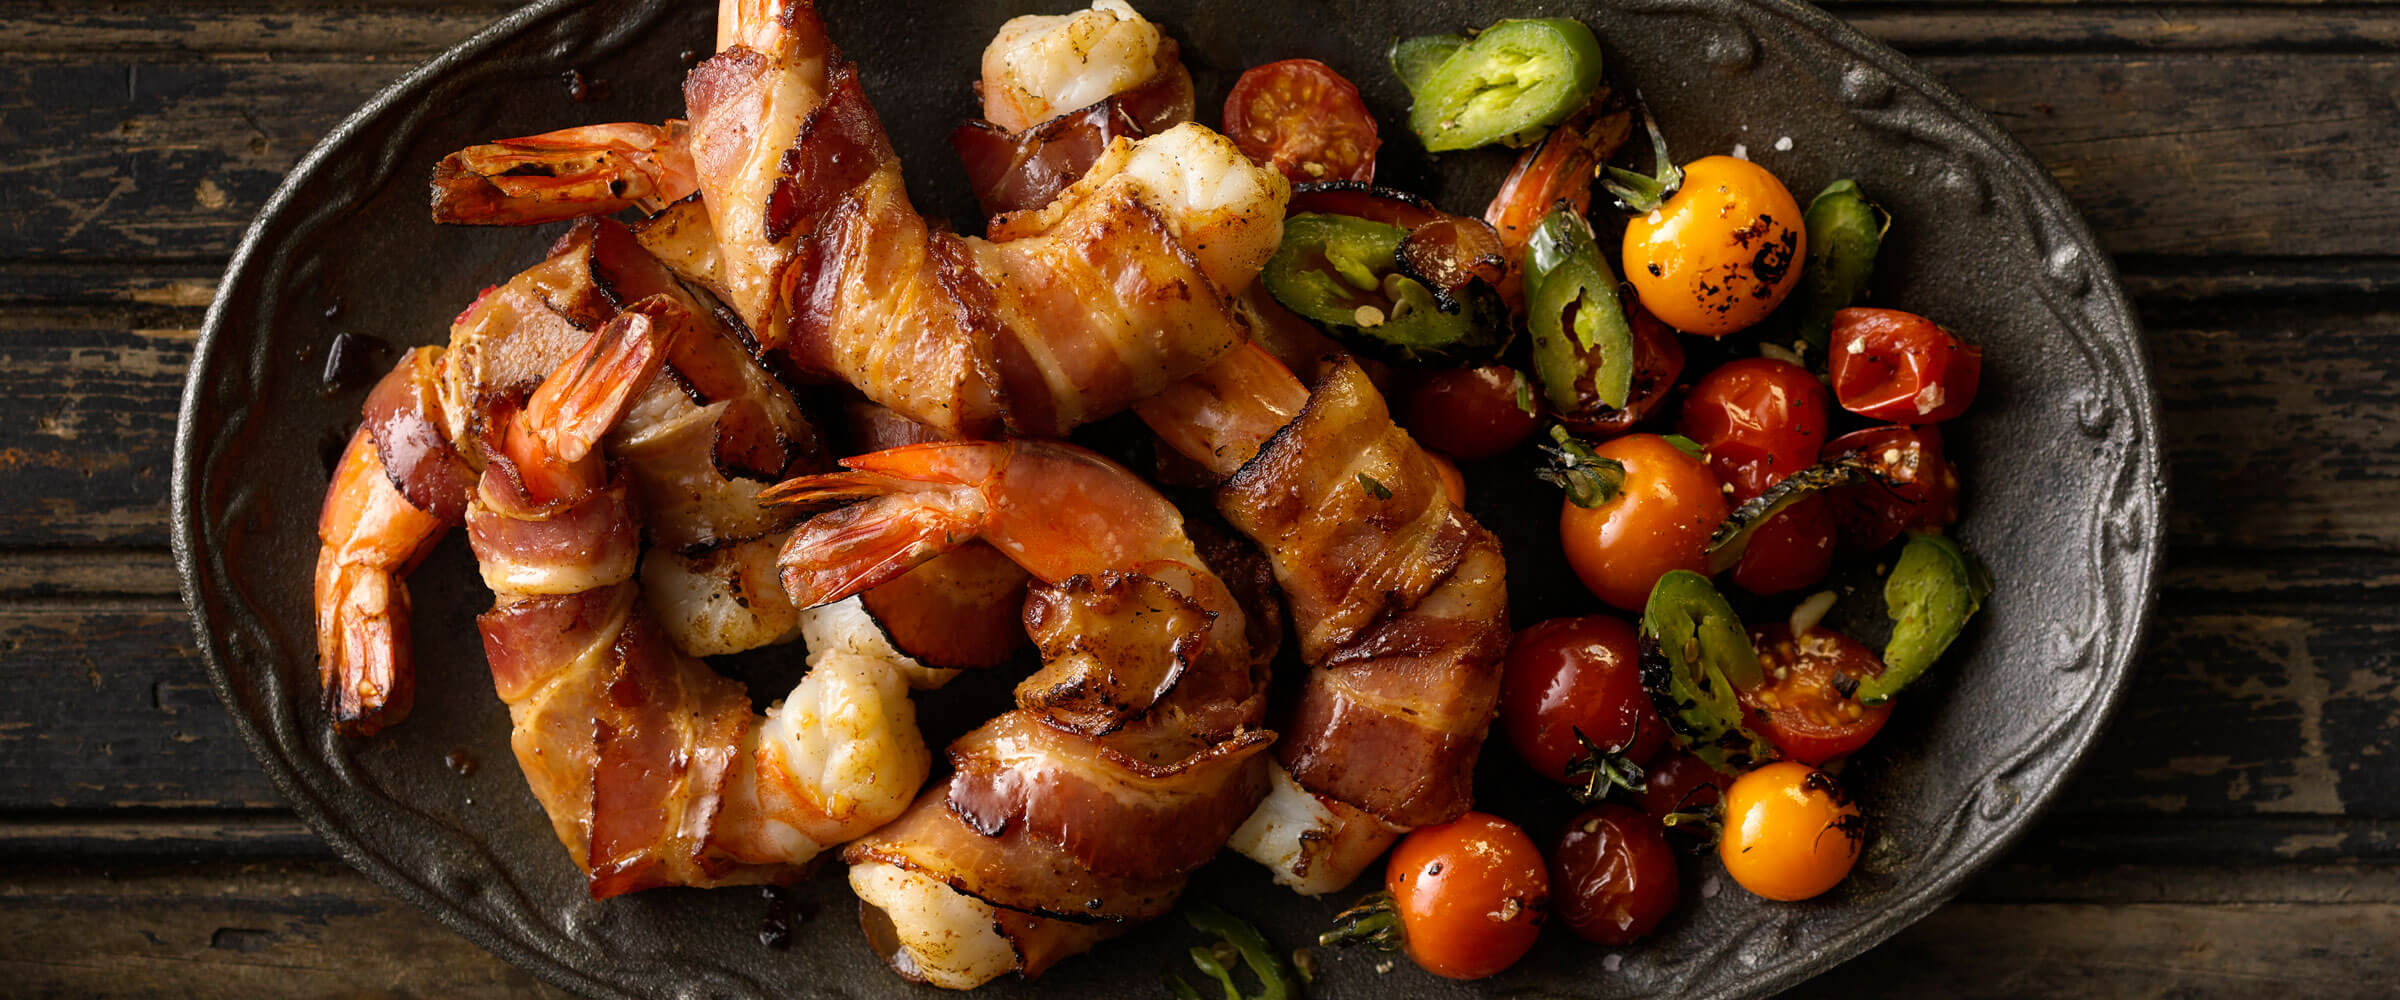 Jalapeno bacon wrapped shrimp with roasted tomatoes and peppers on black plate